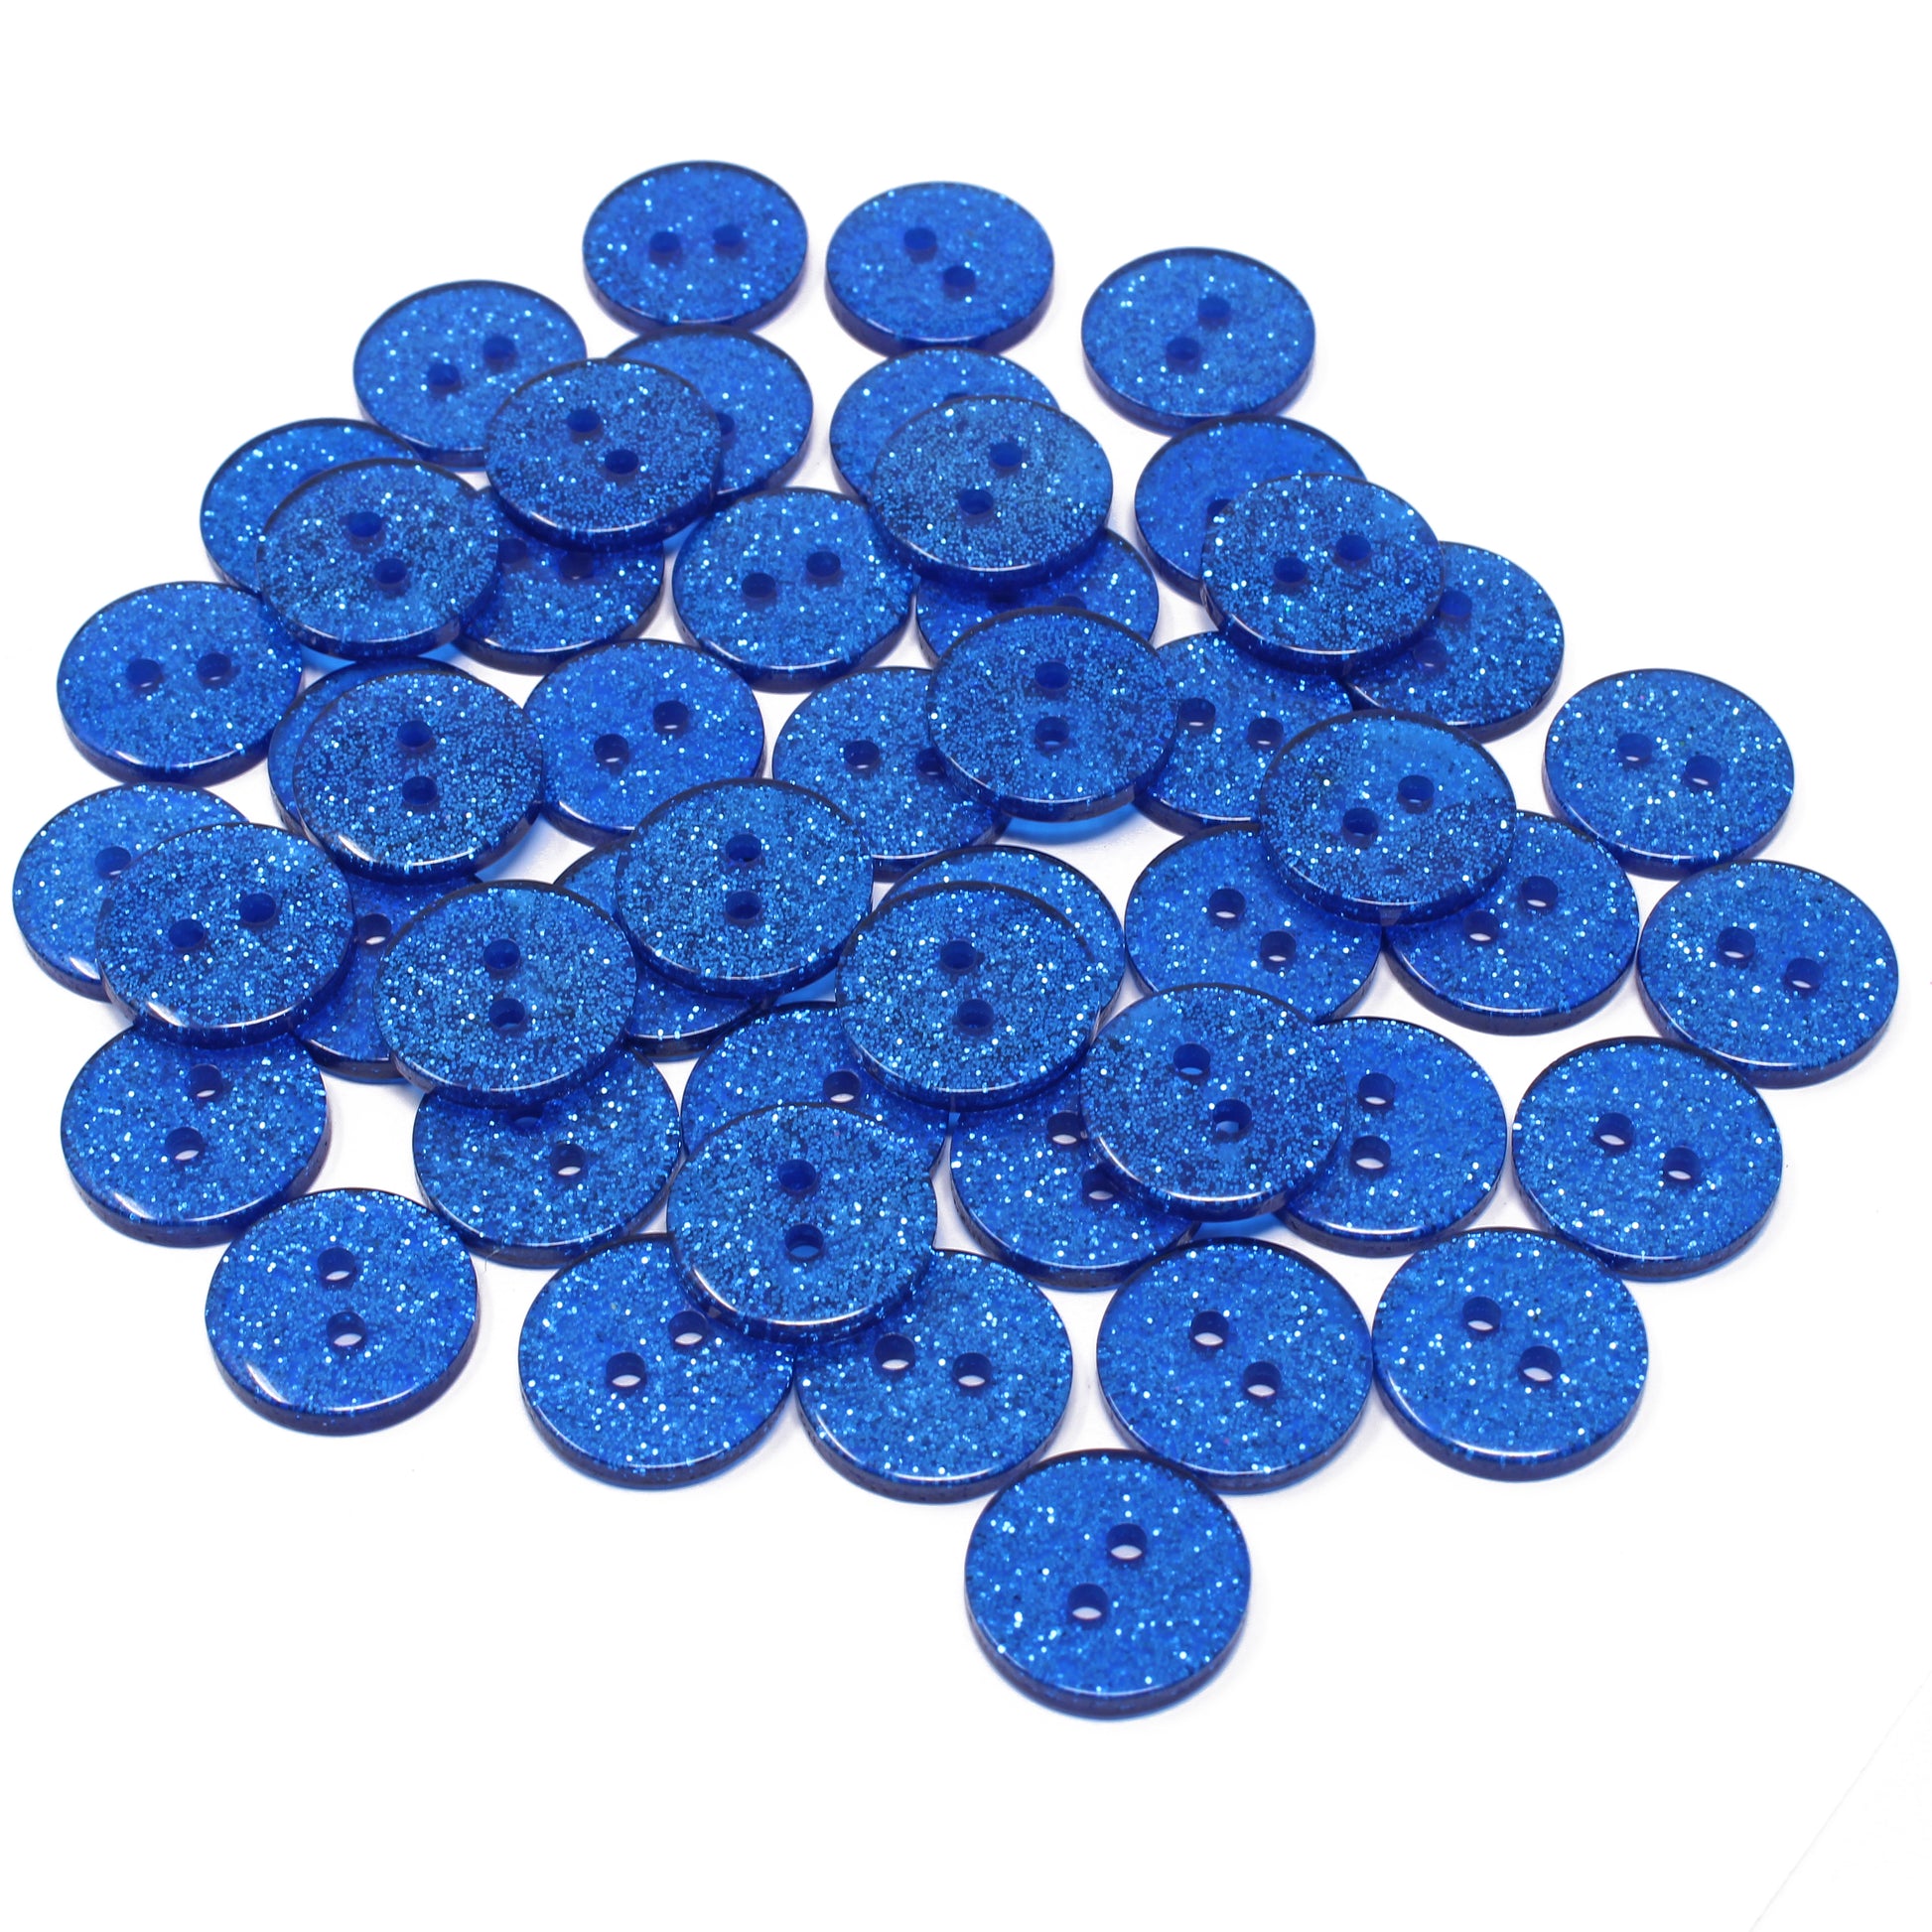 Royal Blue 50 Mix Glitter Round 15mm Resin Buttons